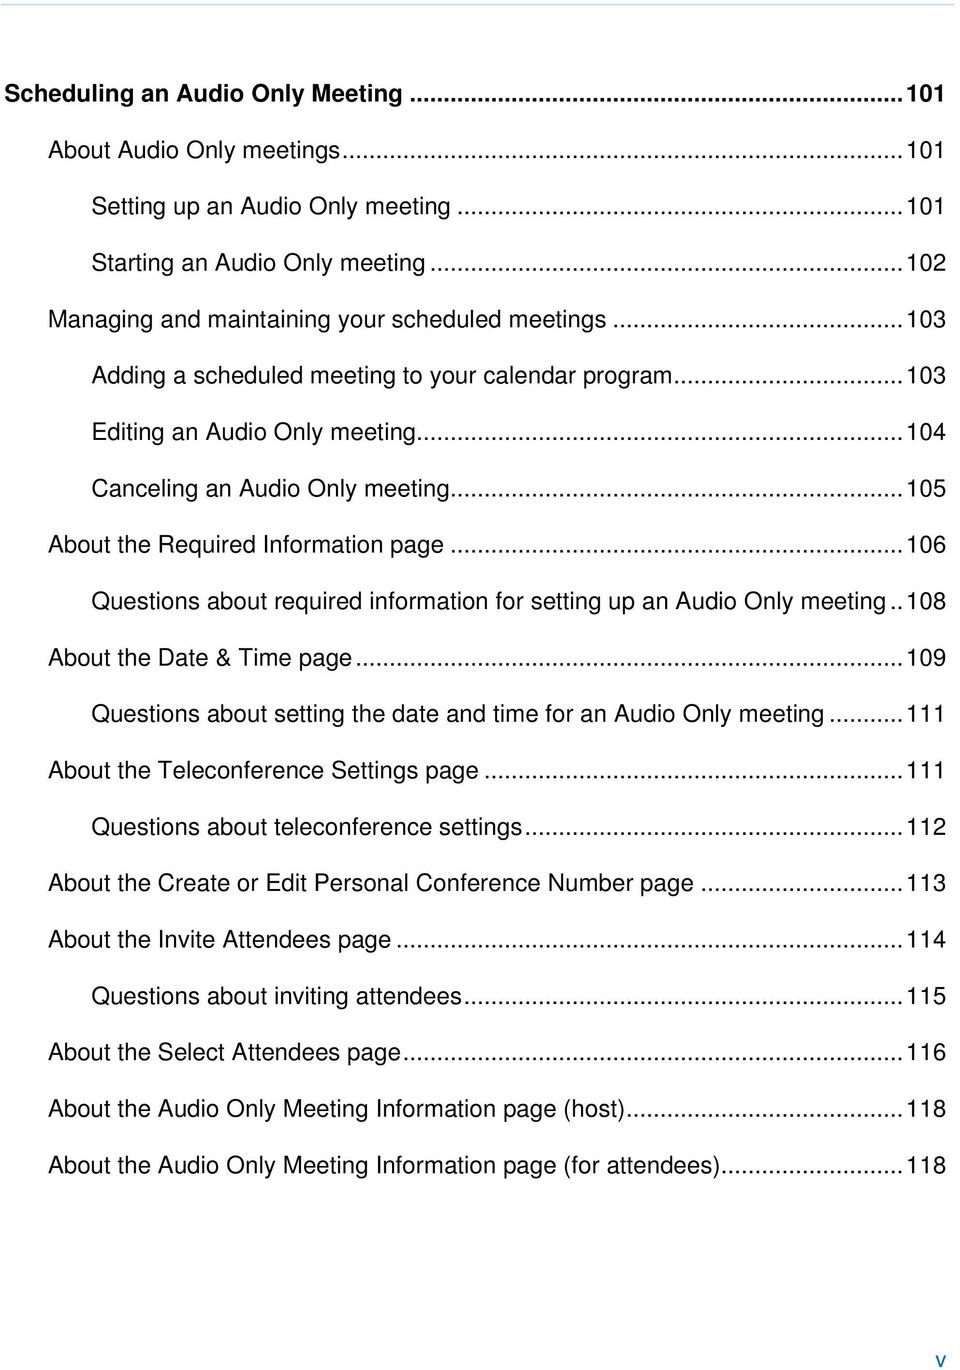 ..106 Questions about required information for setting up an Audio Only meeting..108 About the Date & Time page...109 Questions about setting the date and time for an Audio Only meeting.